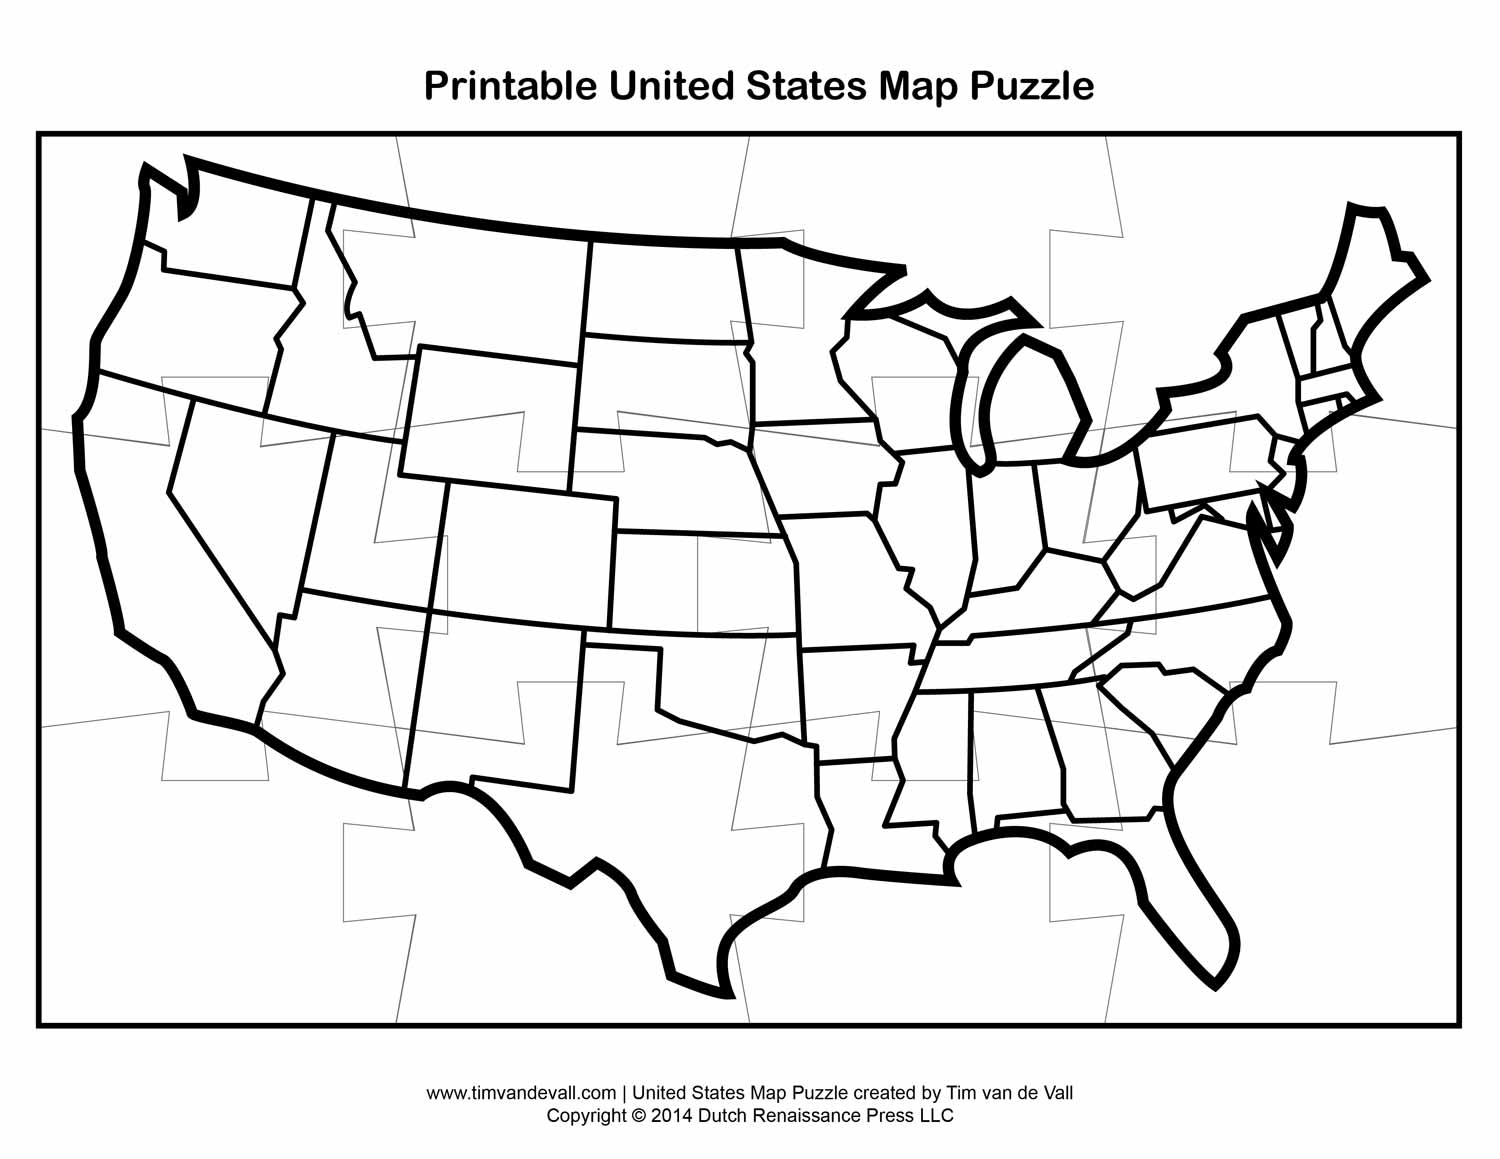 Printable United States Map Puzzle for Kids Make Your Own Puzzle